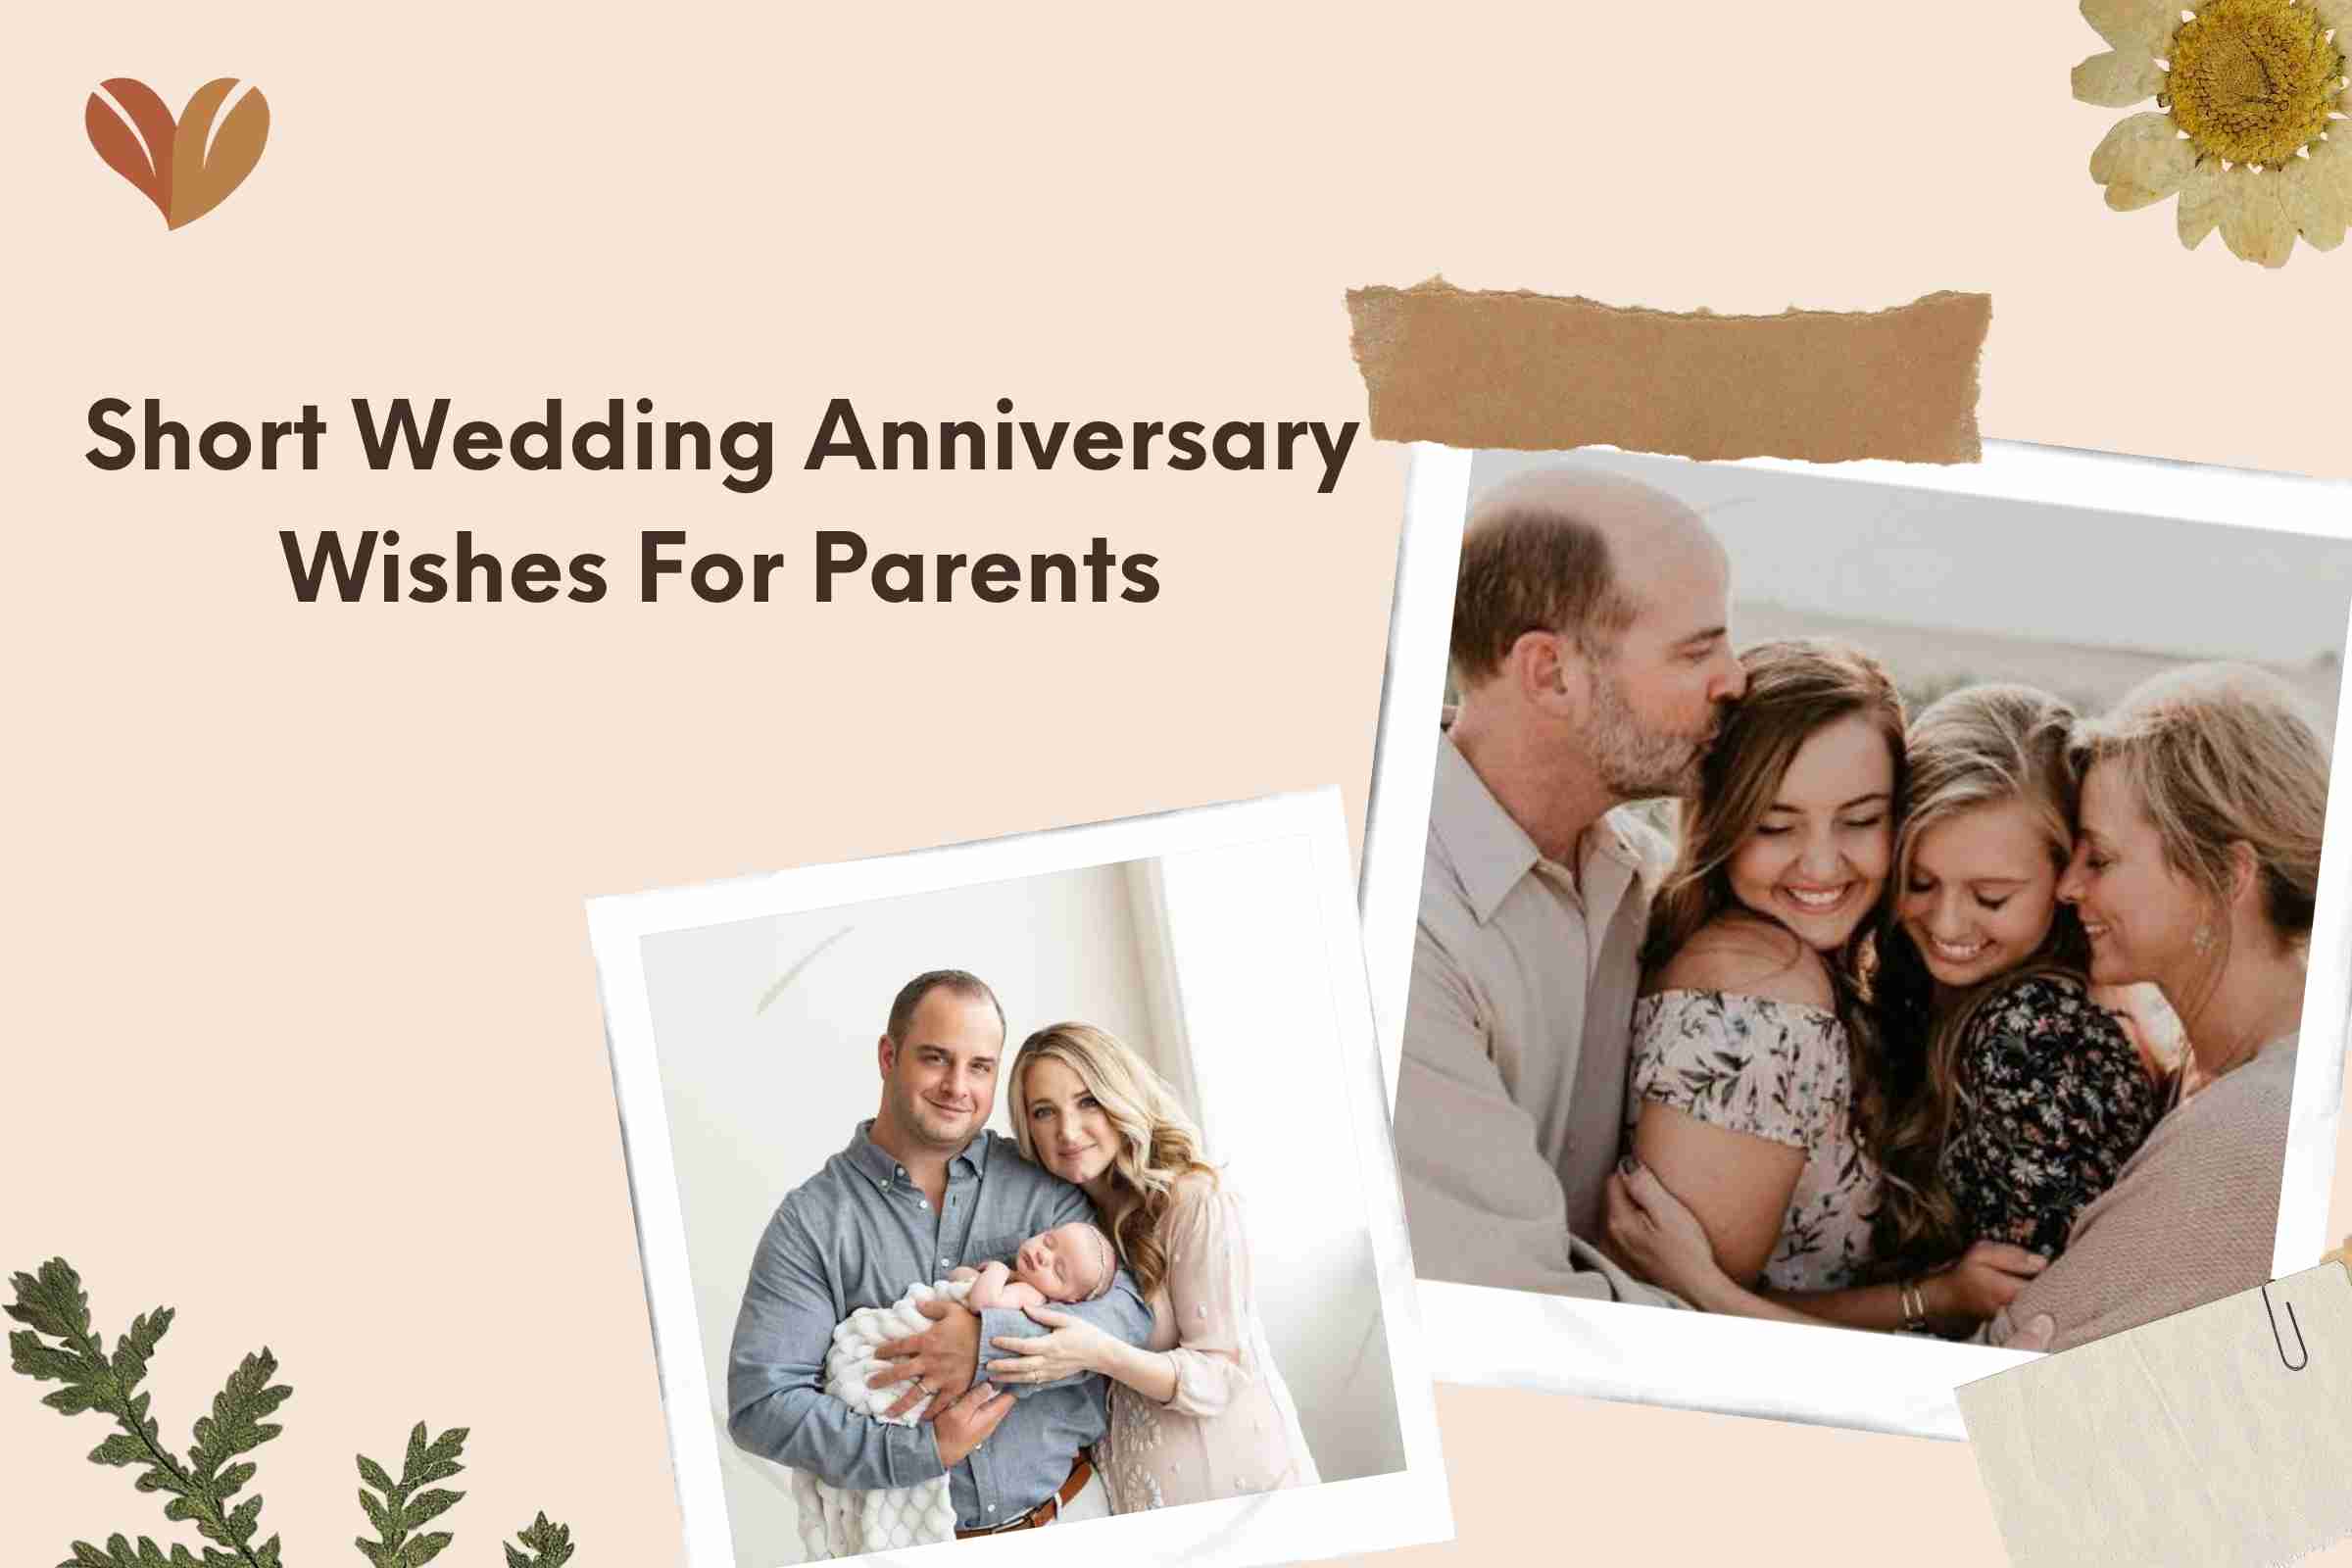 Short Wedding Anniversary Wishes For Parents